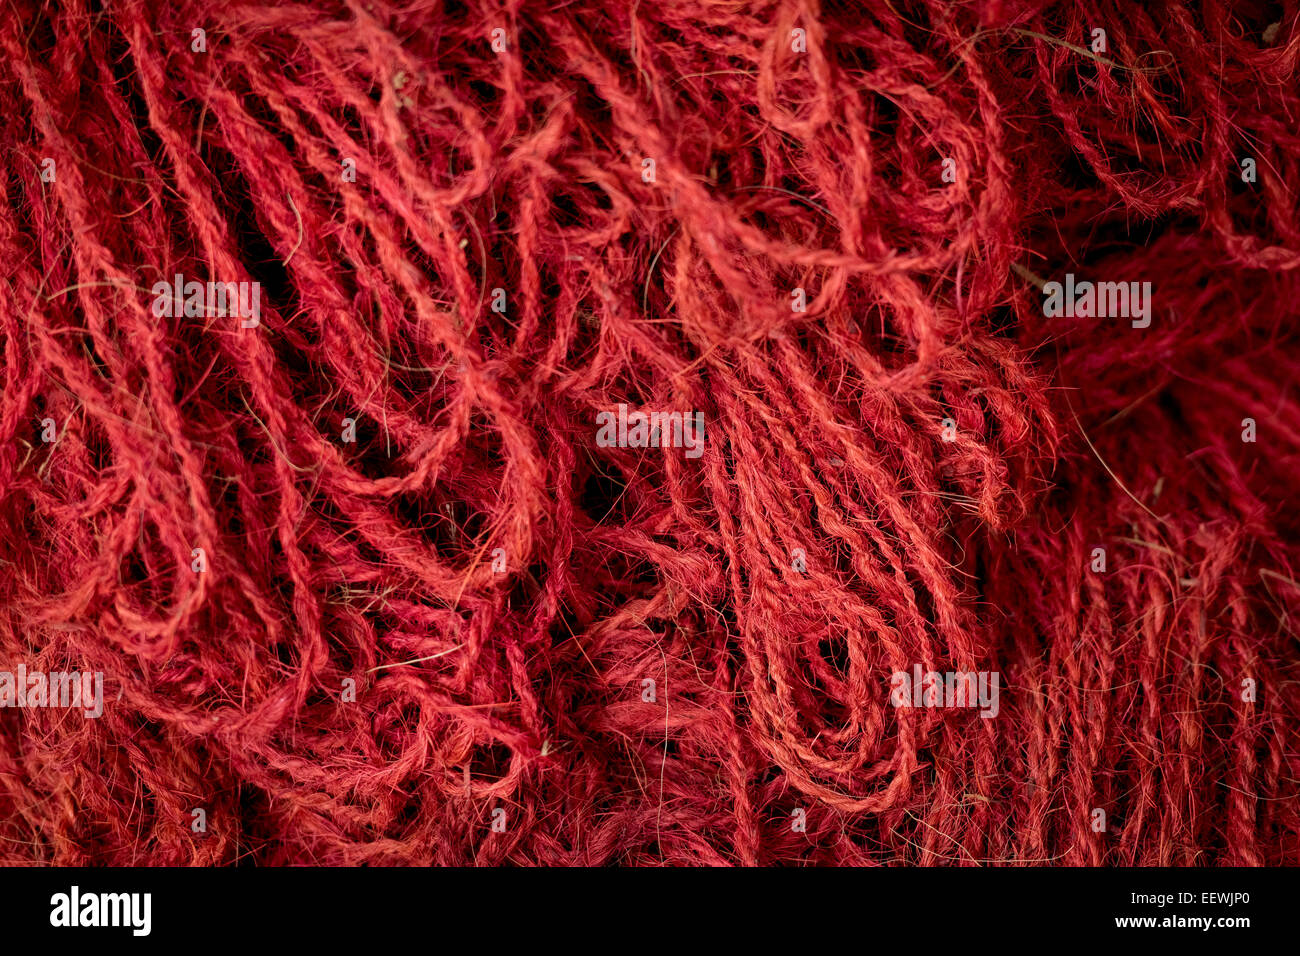 Red coloured ropes made of coconut fibres or coir, coconut fibre industry, factory, Alappuzha, Kerala, India, Asia Stock Photo